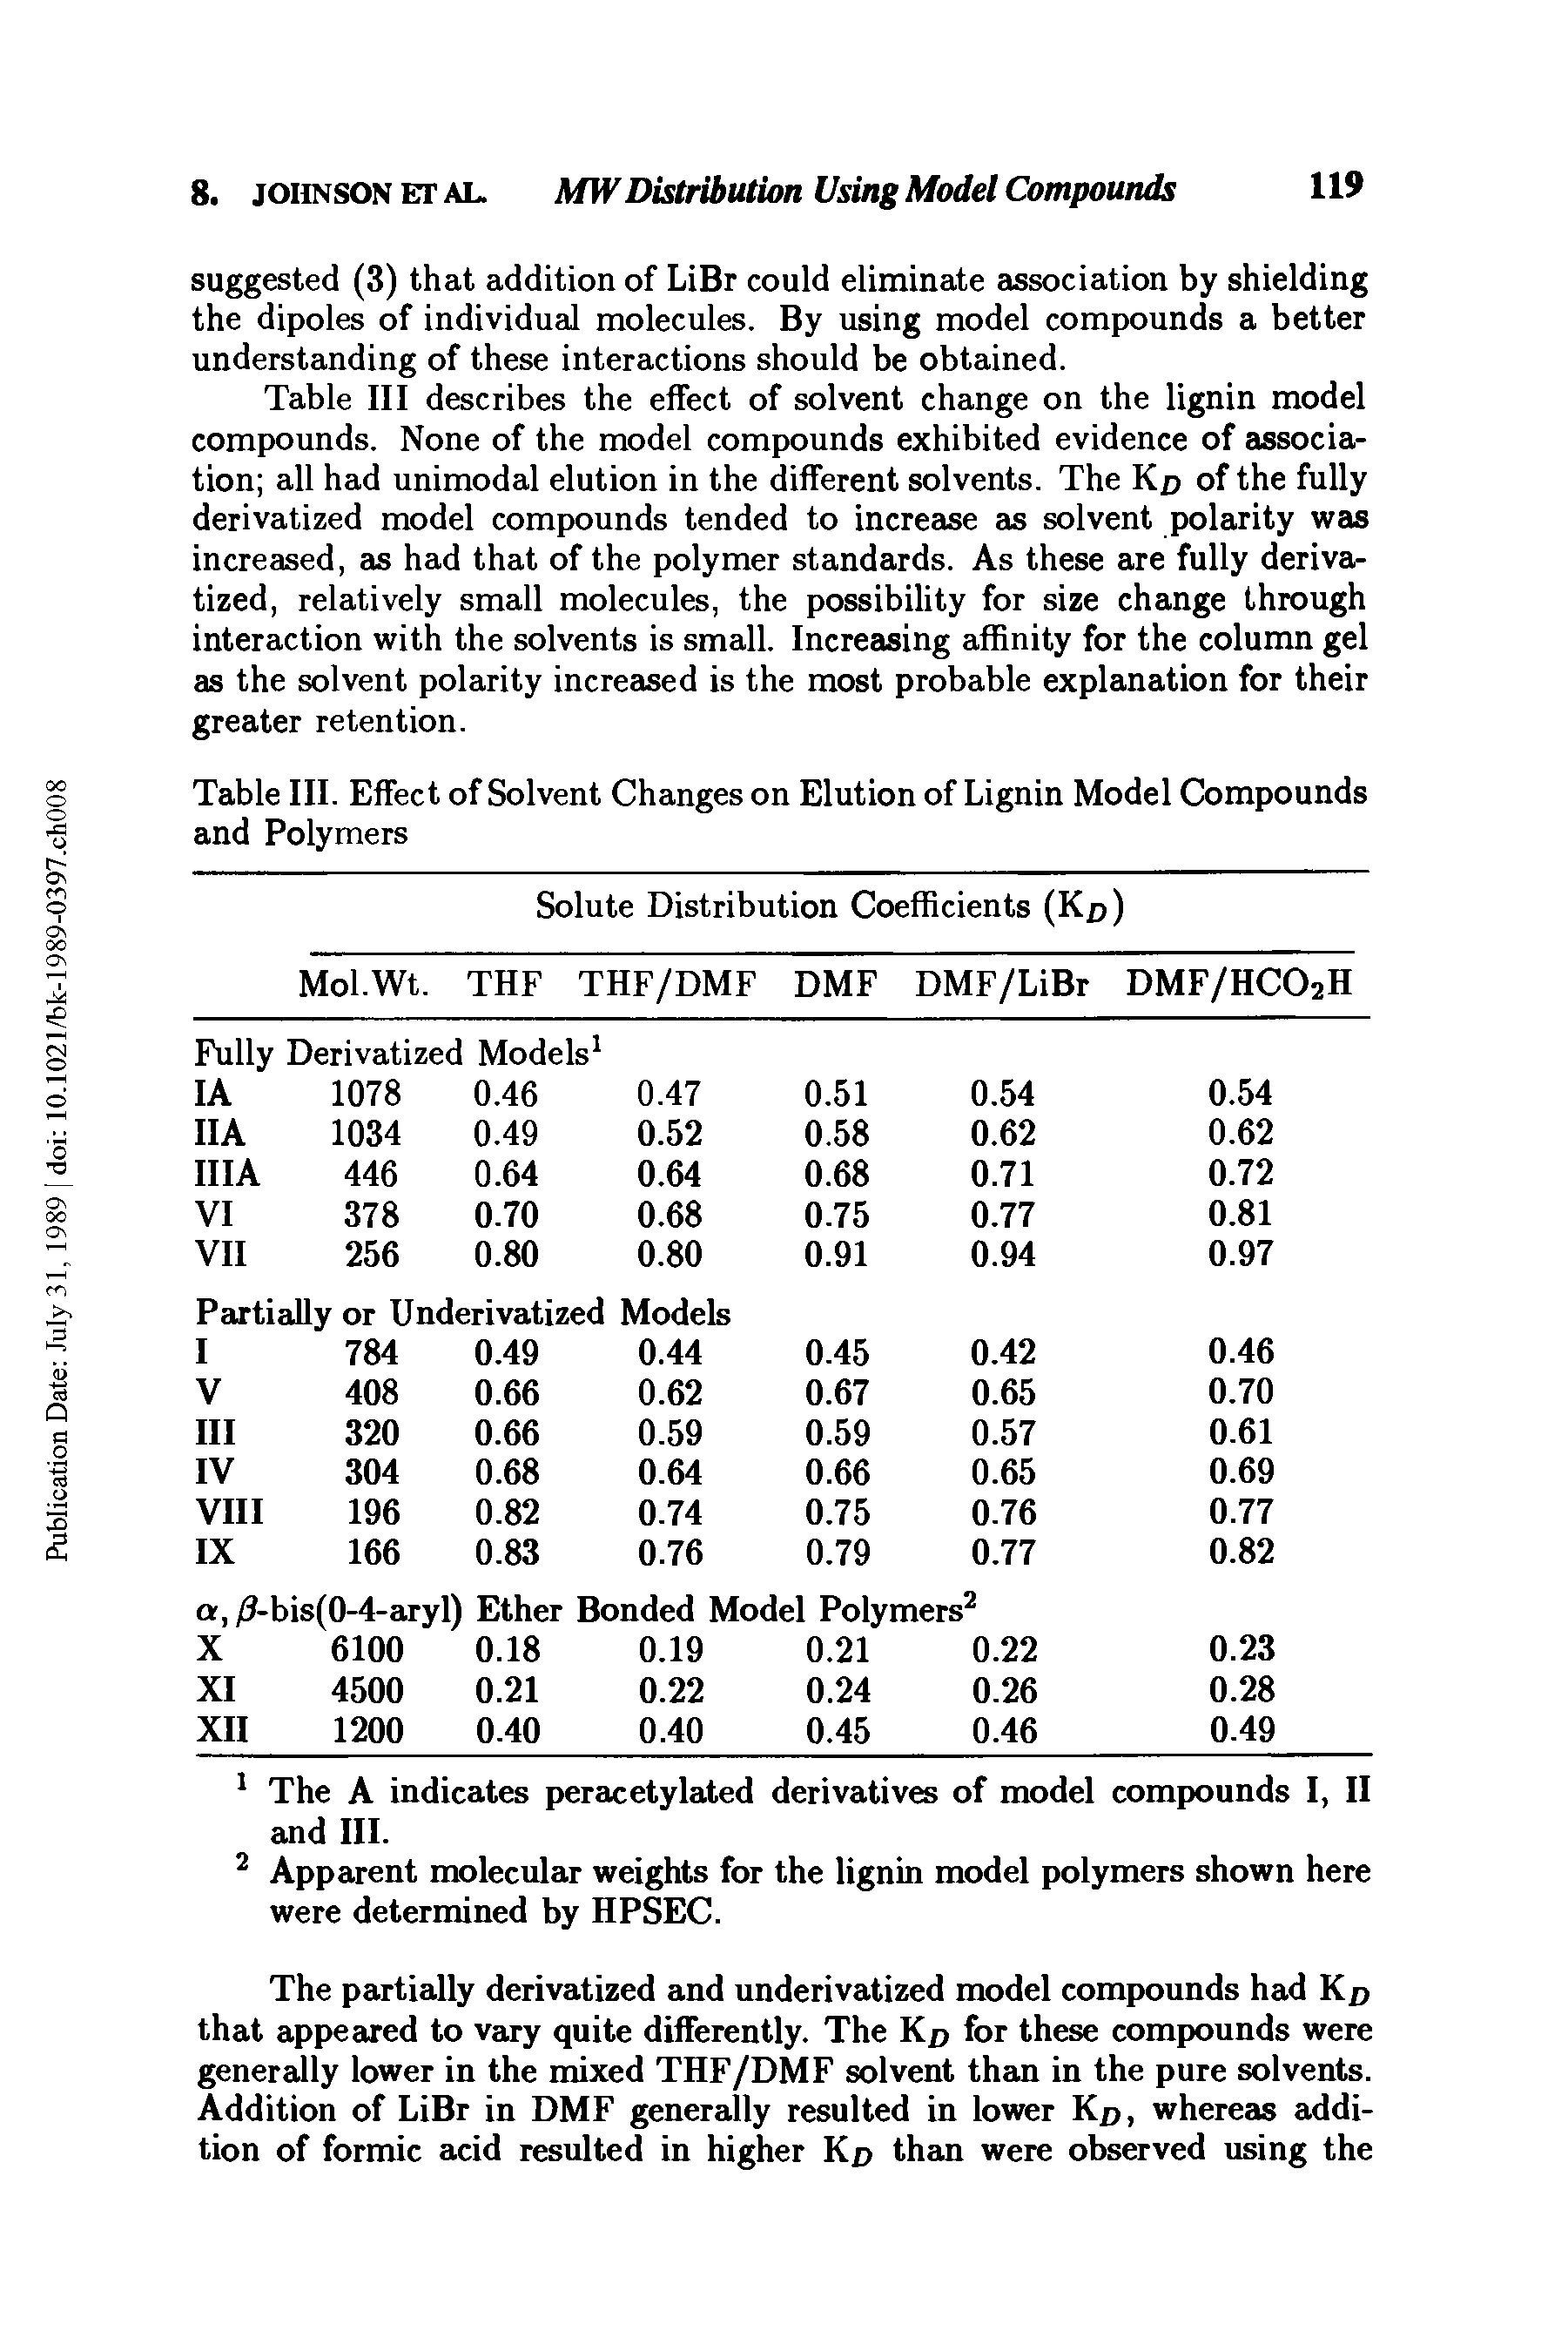 Table III describes the effect of solvent change on the lignin model compounds. None of the model compounds exhibited evidence of association all had unimodal elution in the different solvents. The Kp of the fully derivatized model compounds tended to increase as solvent polarity was increased, as had that of the polymer standards. As these are fully derivatized, relatively small molecules, the possibility for size change through interaction with the solvents is small. Increasing affinity for the column gel as the solvent polarity increased is the most probable explanation for their greater retention.